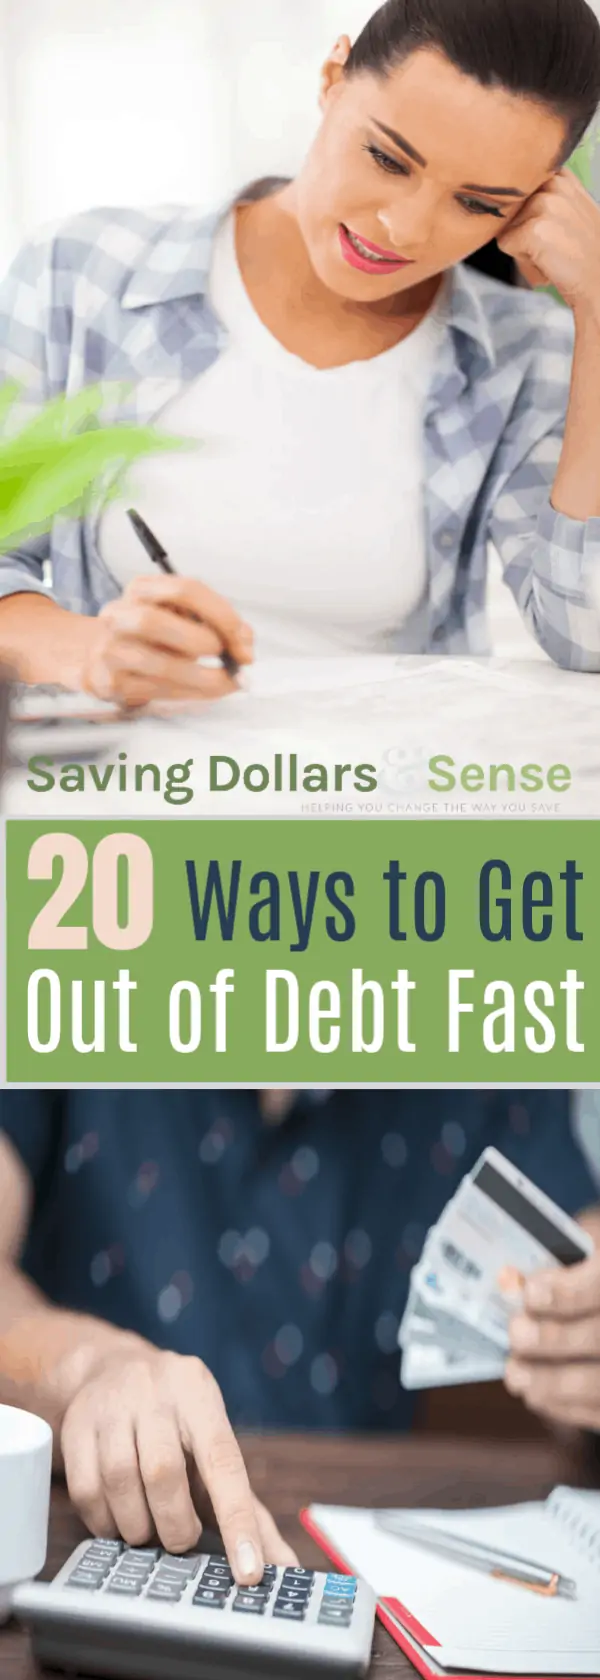 20 Ways to Get Out of Debt Fast